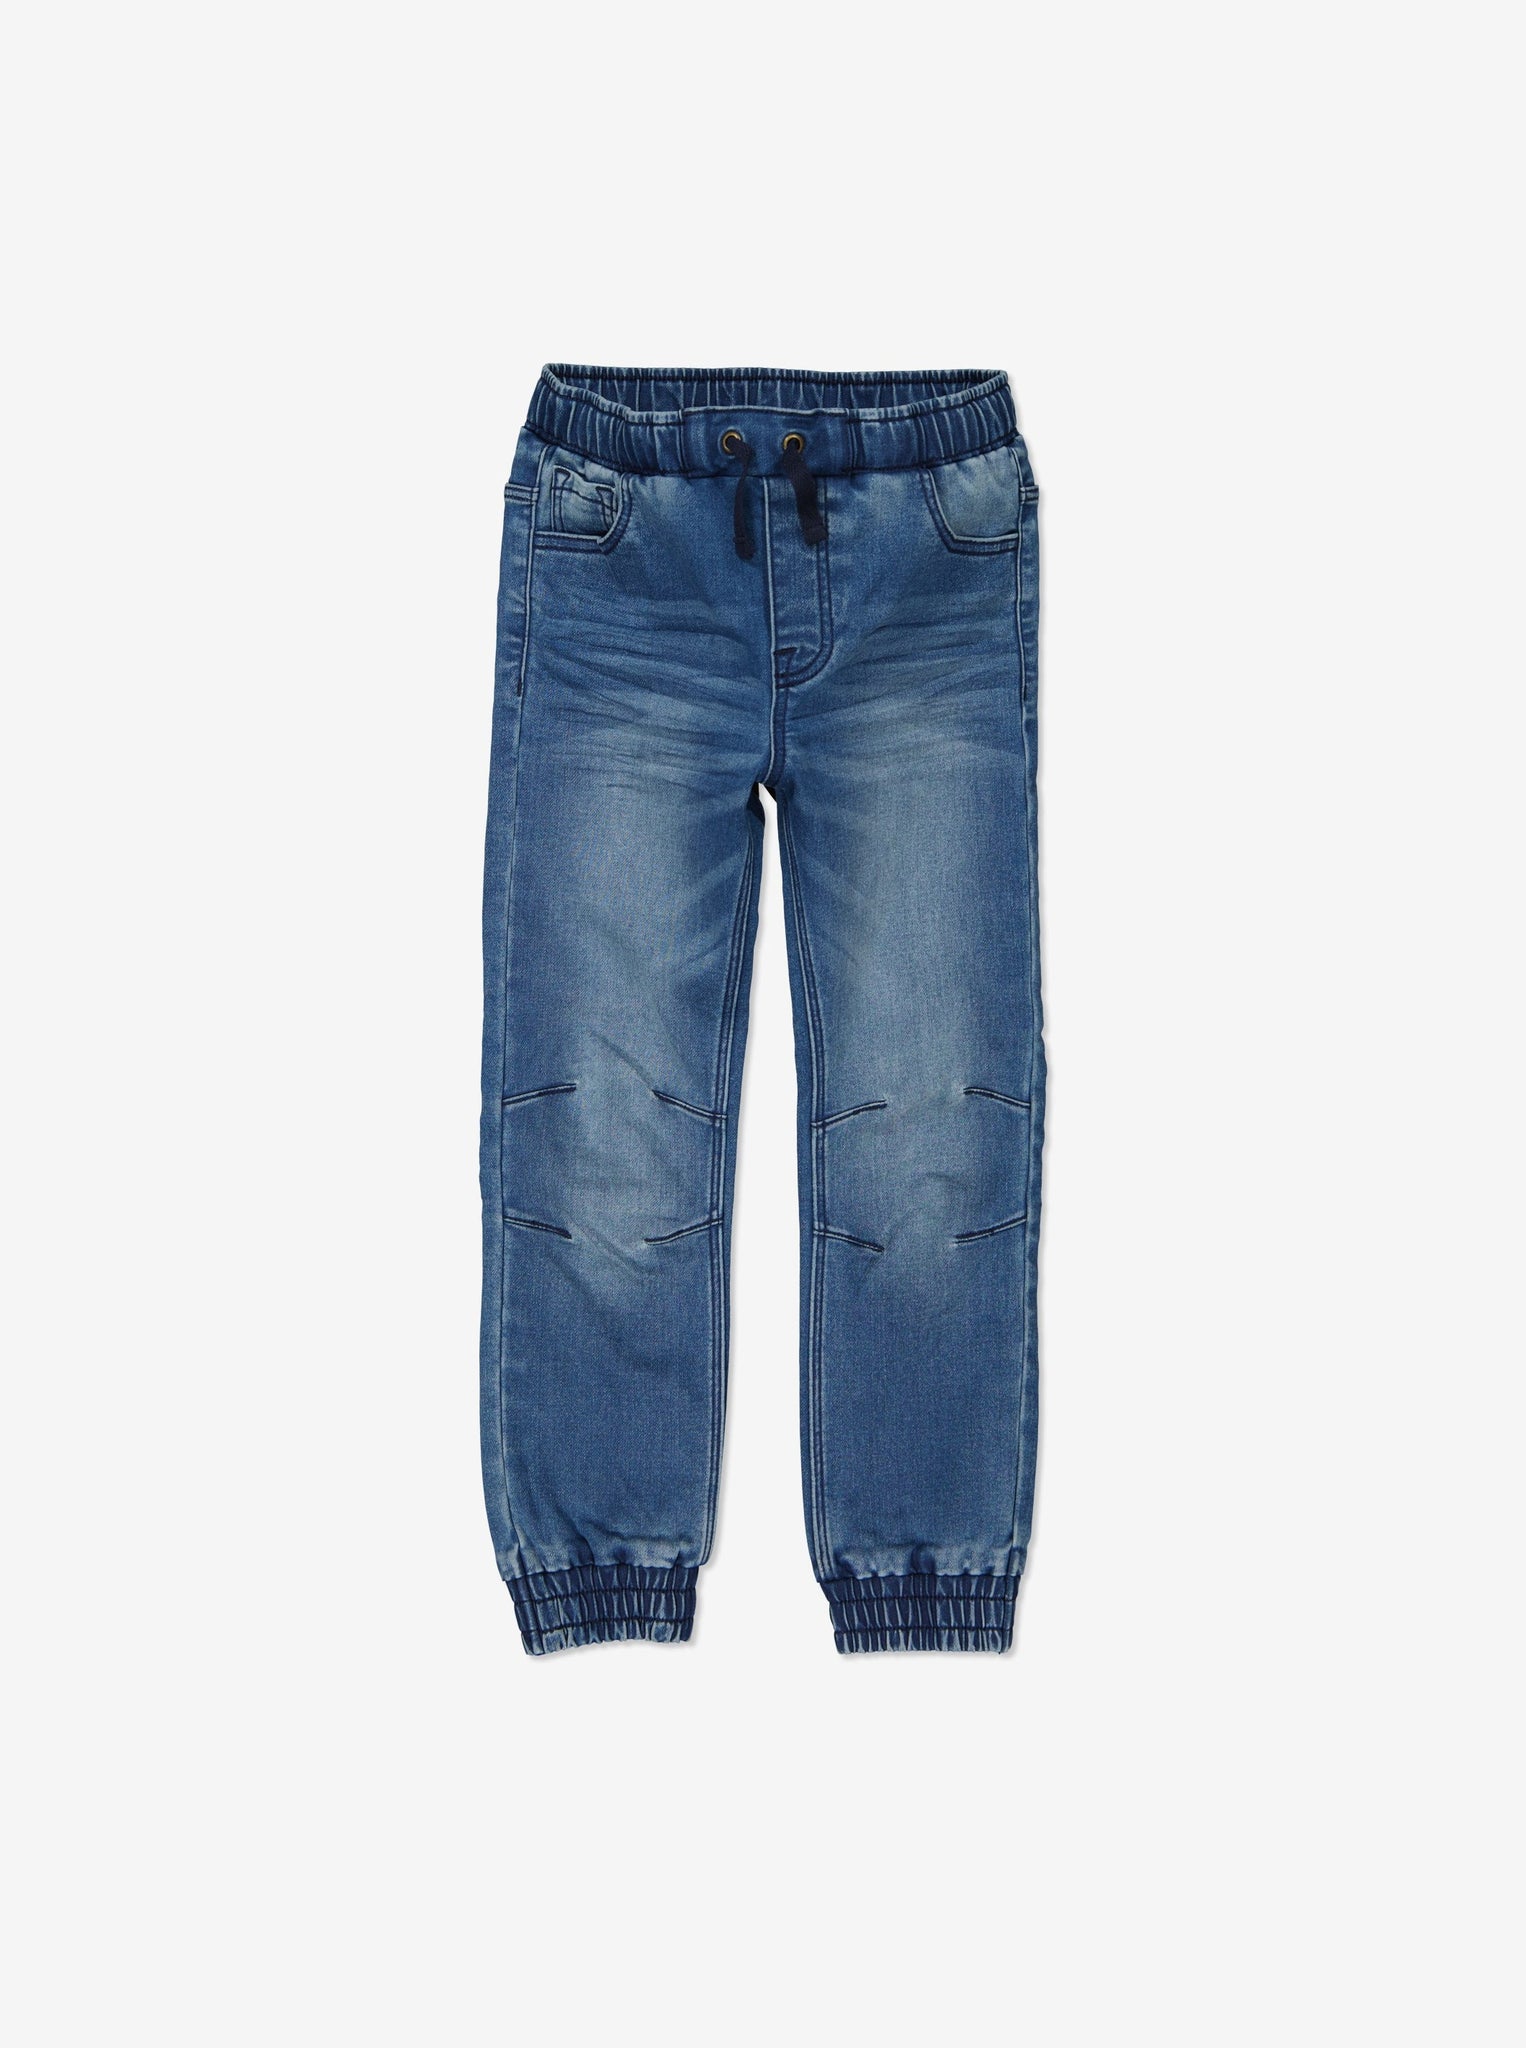 ANDY - Jogger Kids Jeans